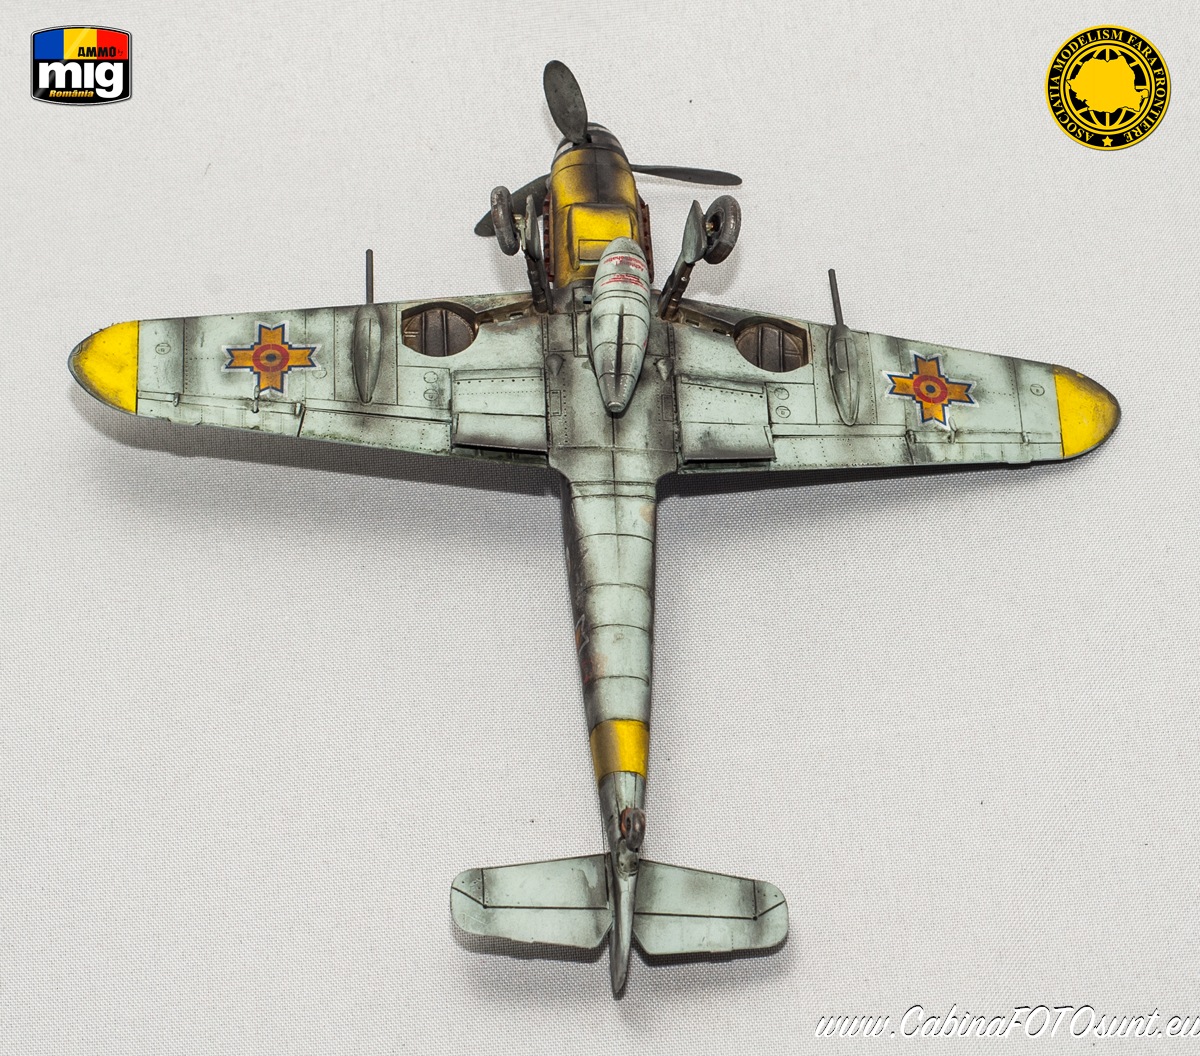 Messerschmitt Bf 109 Ga-2 in Romanian service 1:72 scale, AZ Model 7488 - Limited Edition, AMMO by Mig Acrylics, pigments and washes.